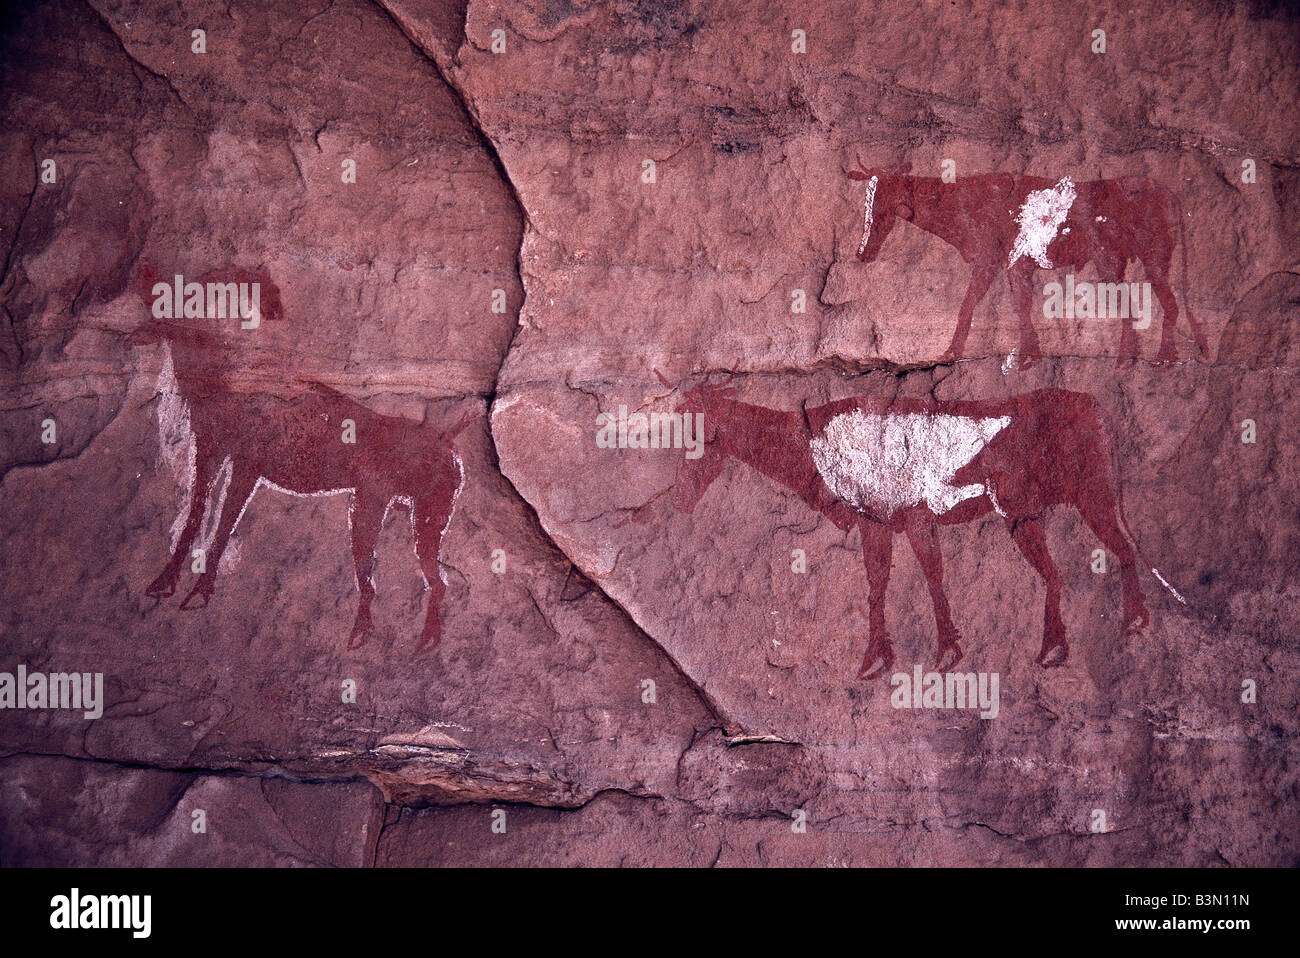 Rock paintings depict animals that existed when the Sahara Desert was green, Libya. Stock Photo